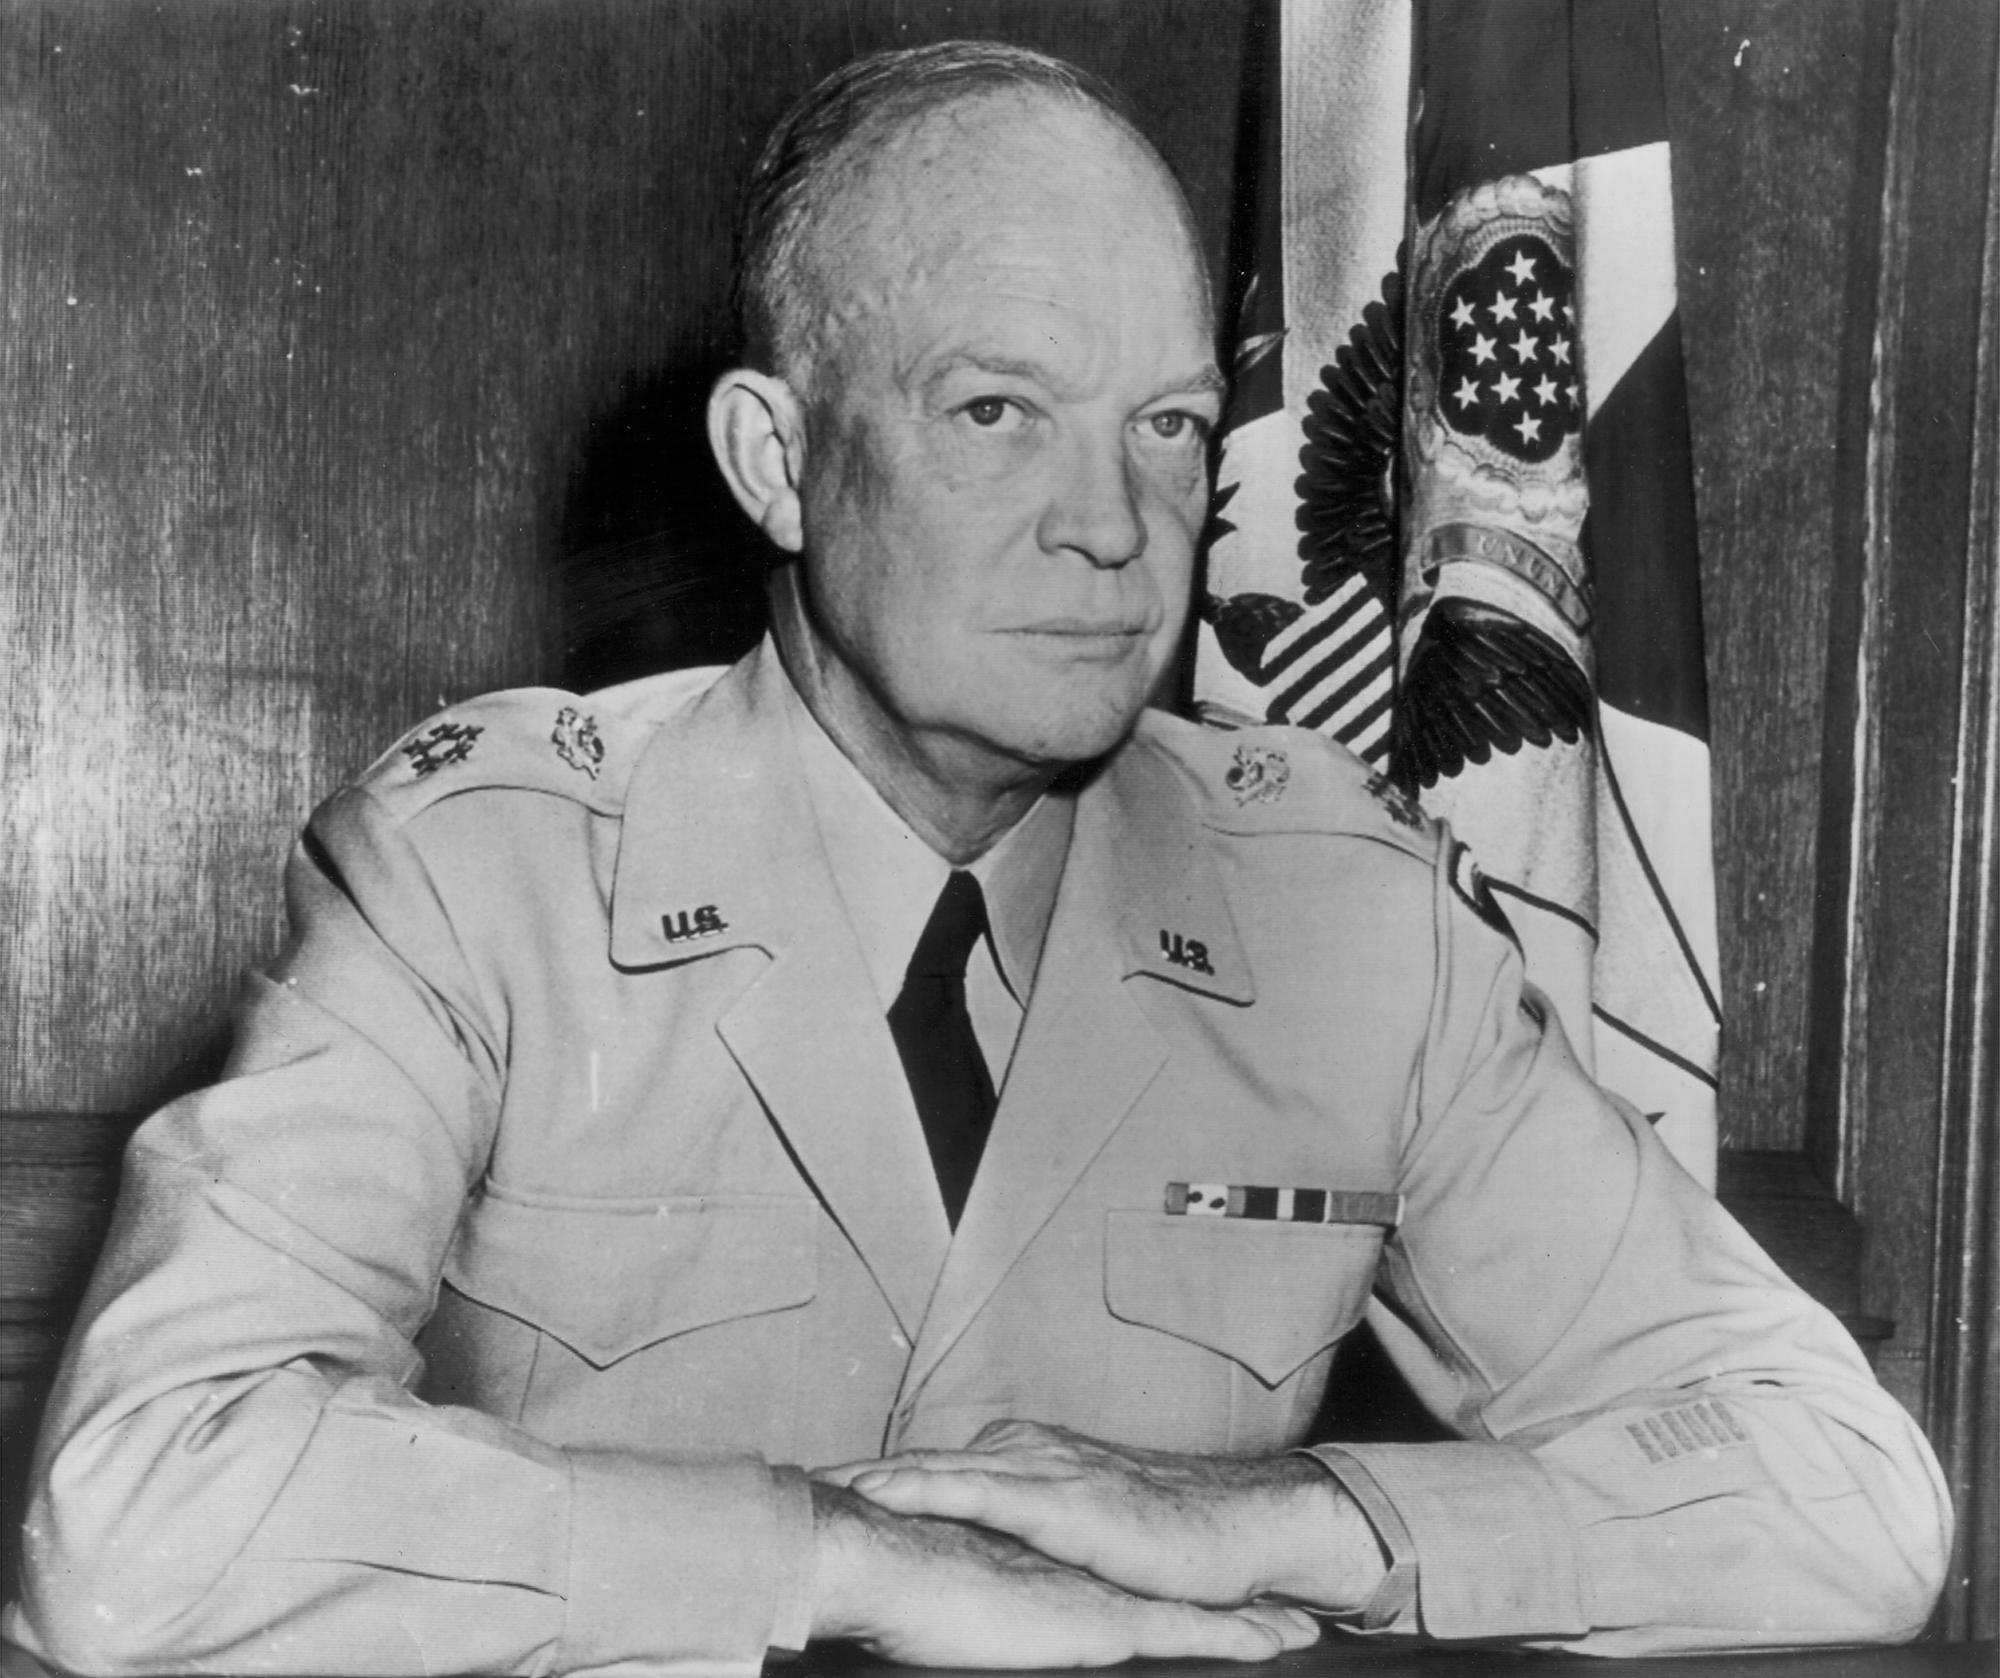 Young Dwight D. Eisenhower learned from disappointing first years at Fort  Sam